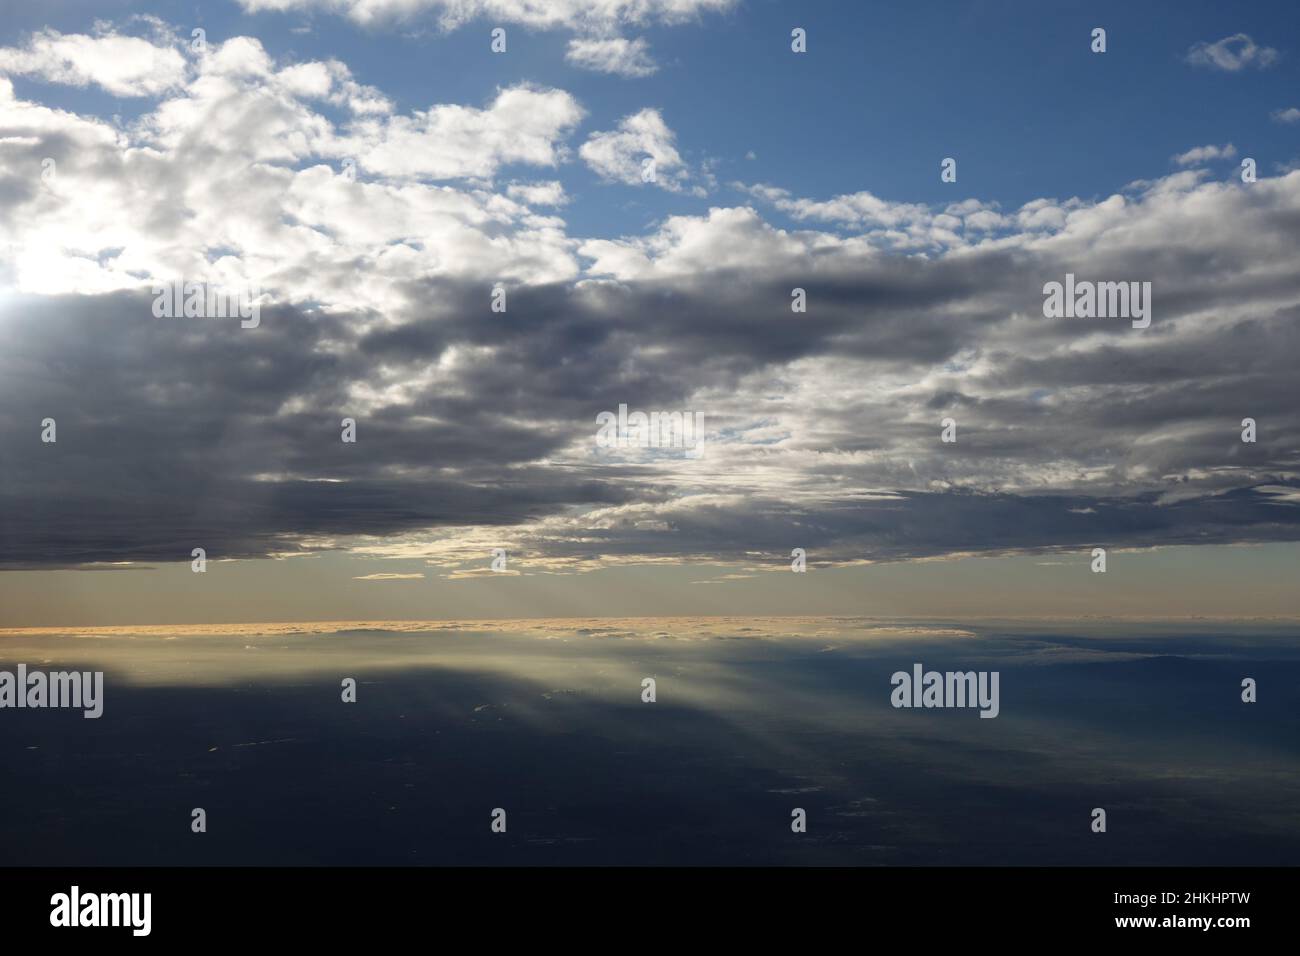 Bright blue sky with white clouds hiding the sun Stock Photo